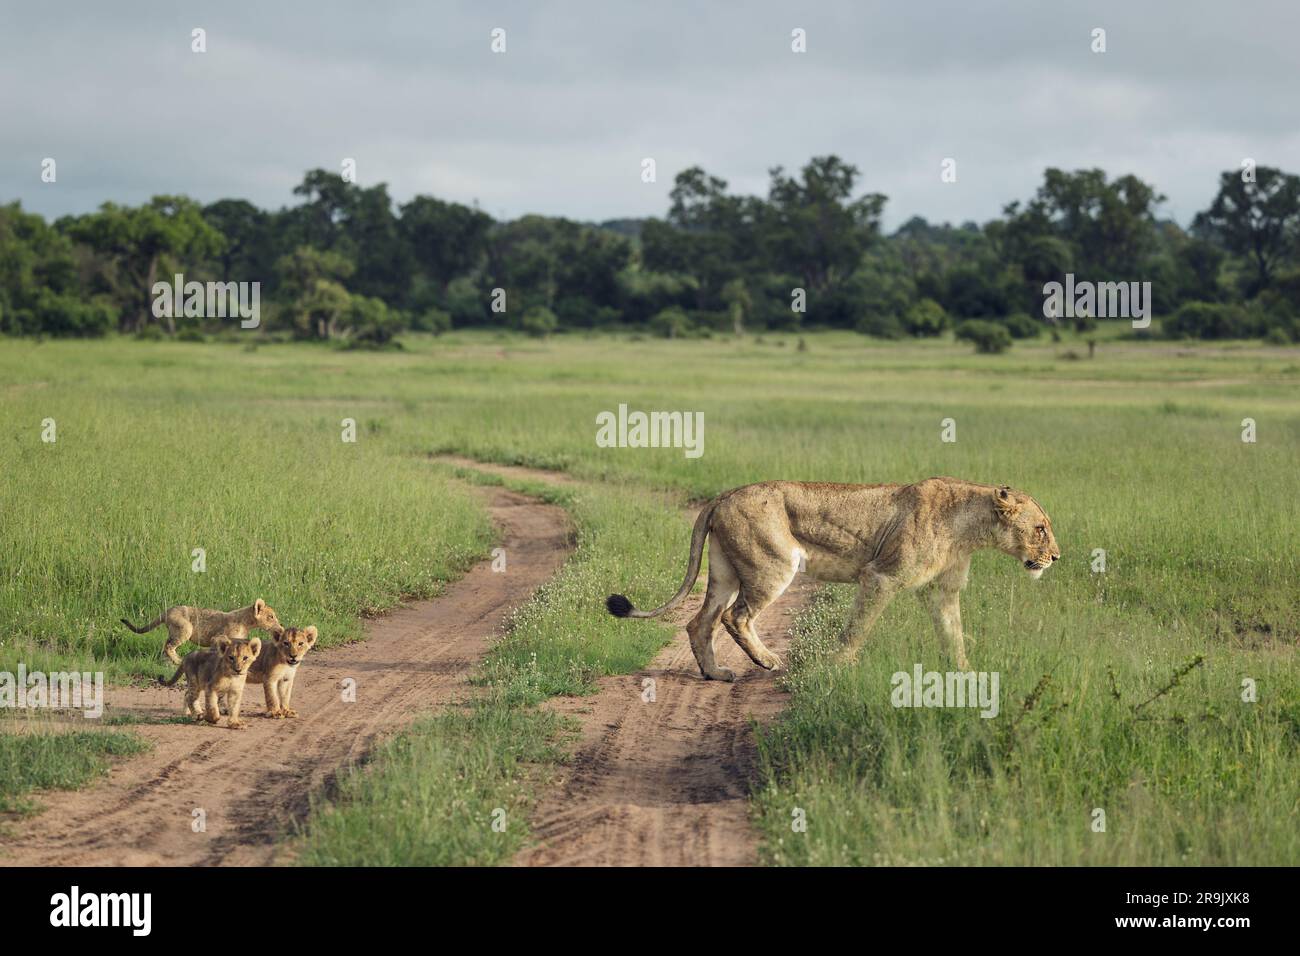 A lioness, Panthera leo, walking through grass, with her cubs trailing behind her. Stock Photo